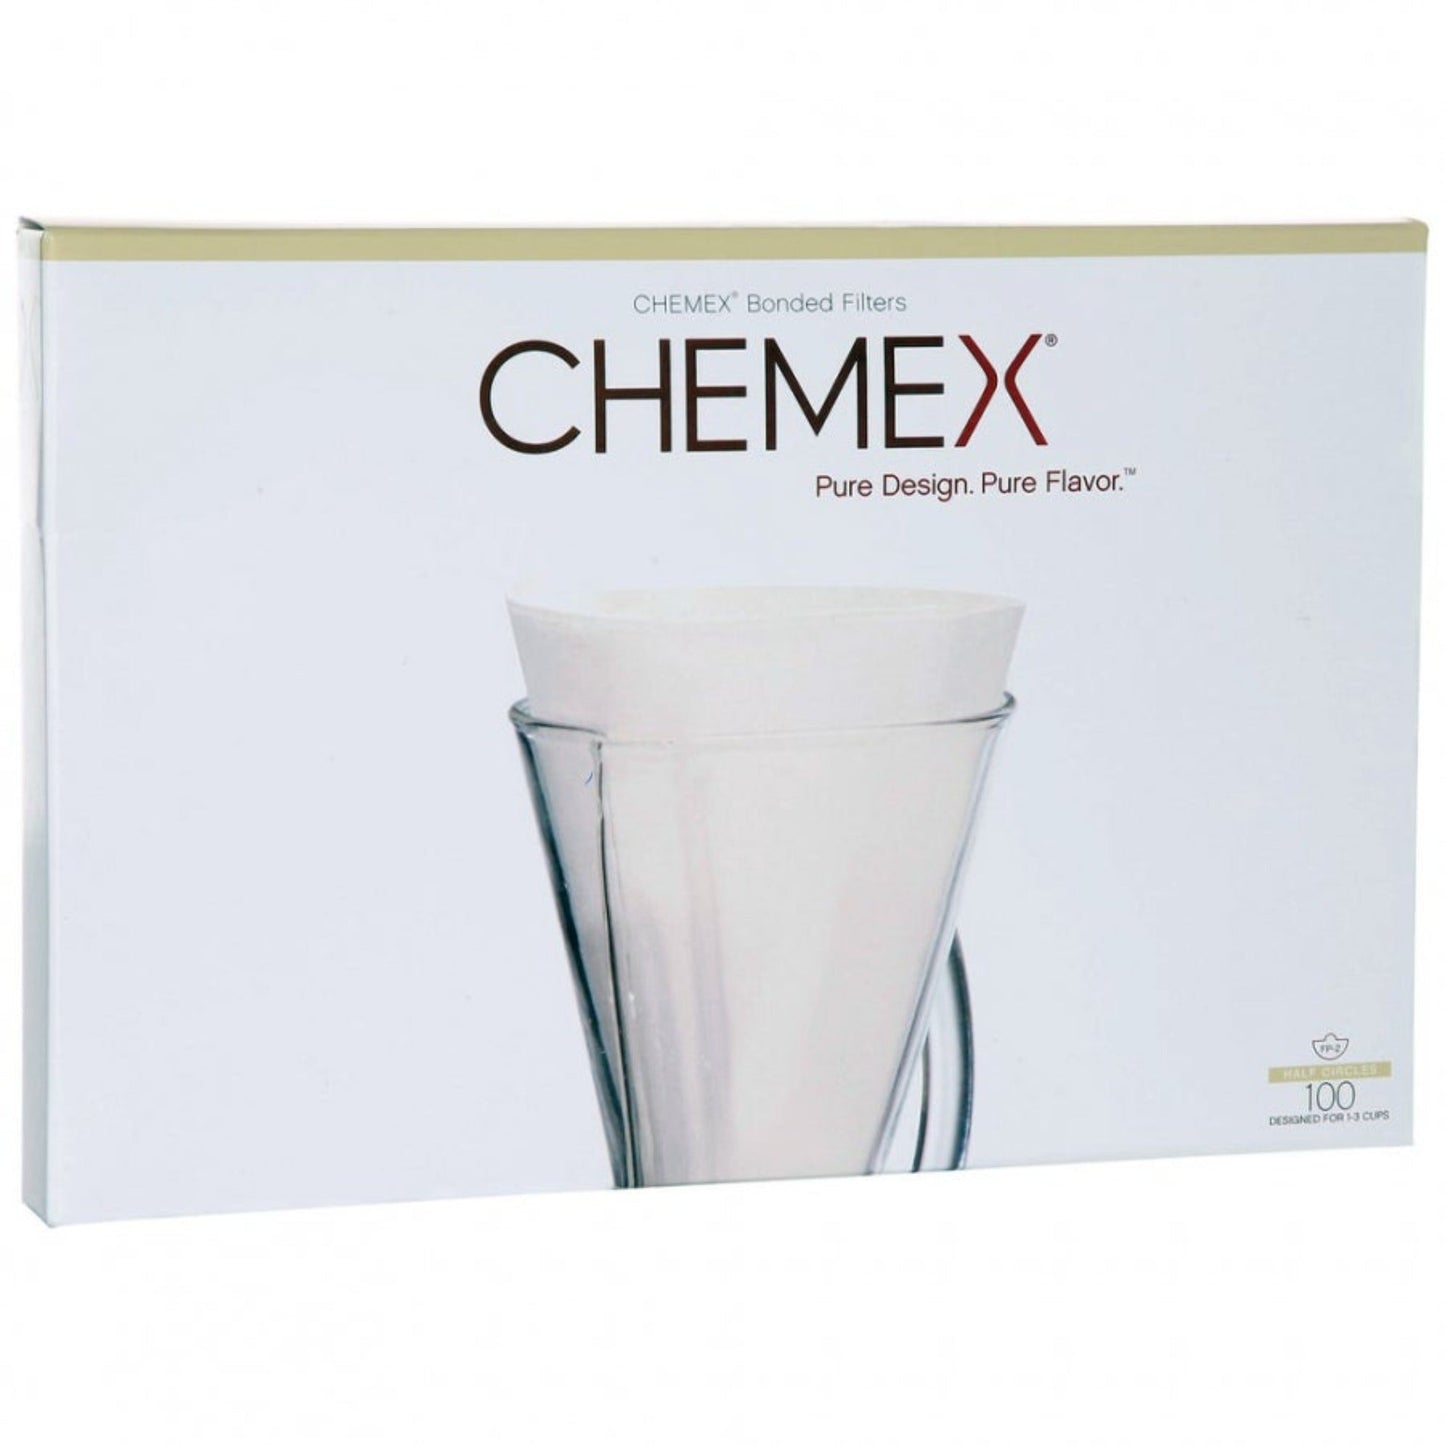 Chemex Bonded Filter Paper - White and Tan Box Velo Coffee Roasters